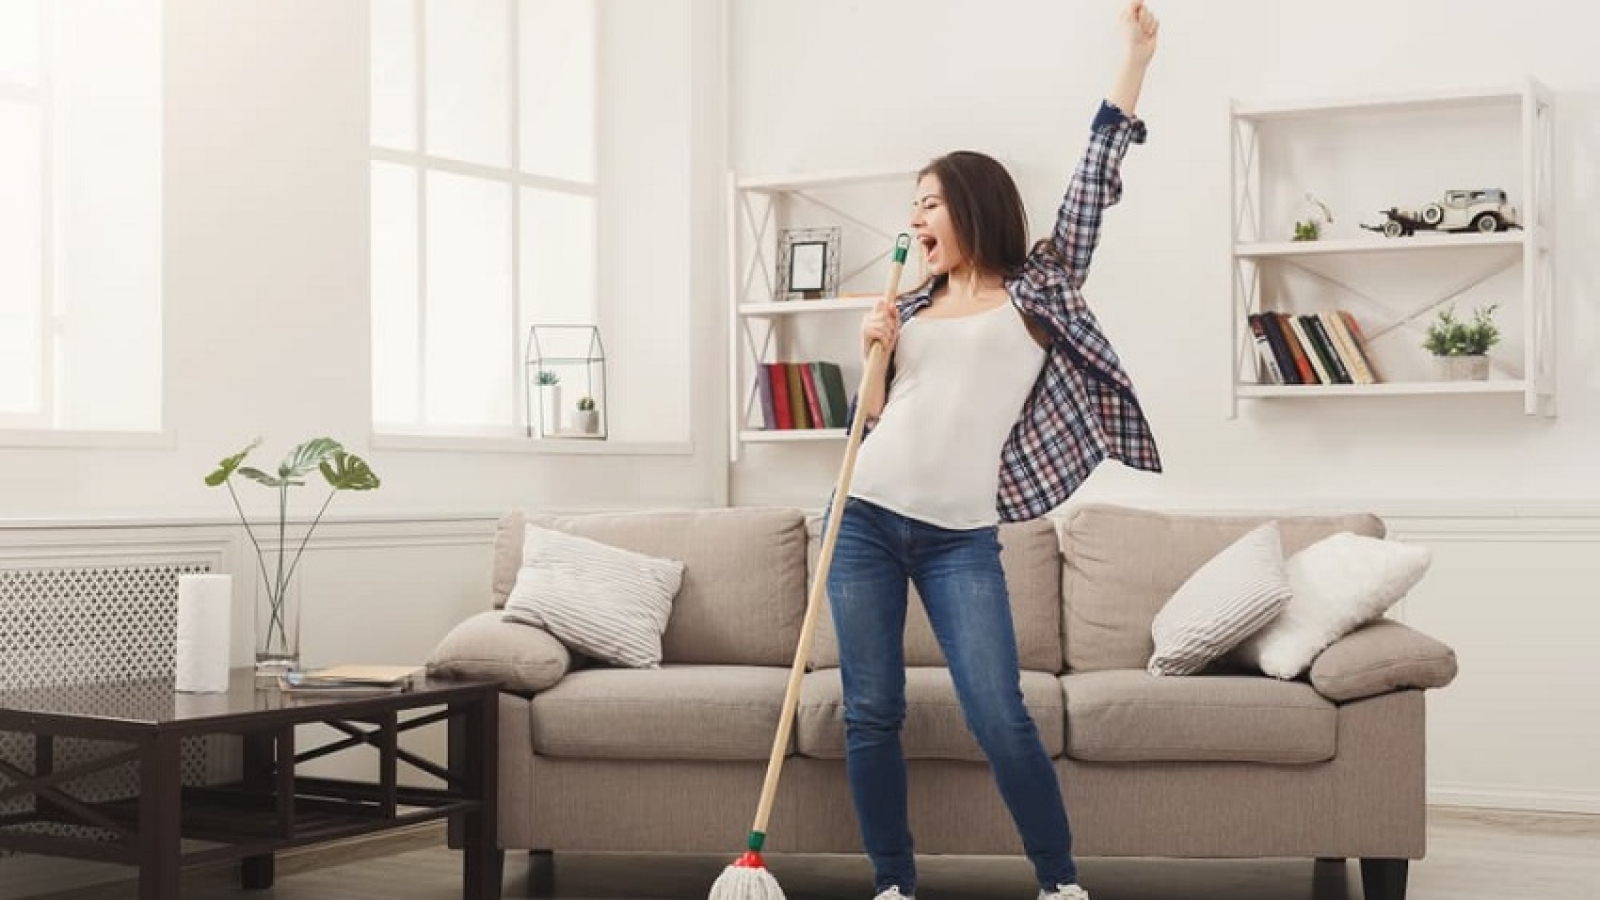 5 Ways Cleaning Services Can Make Your Home Functional and Comfortable